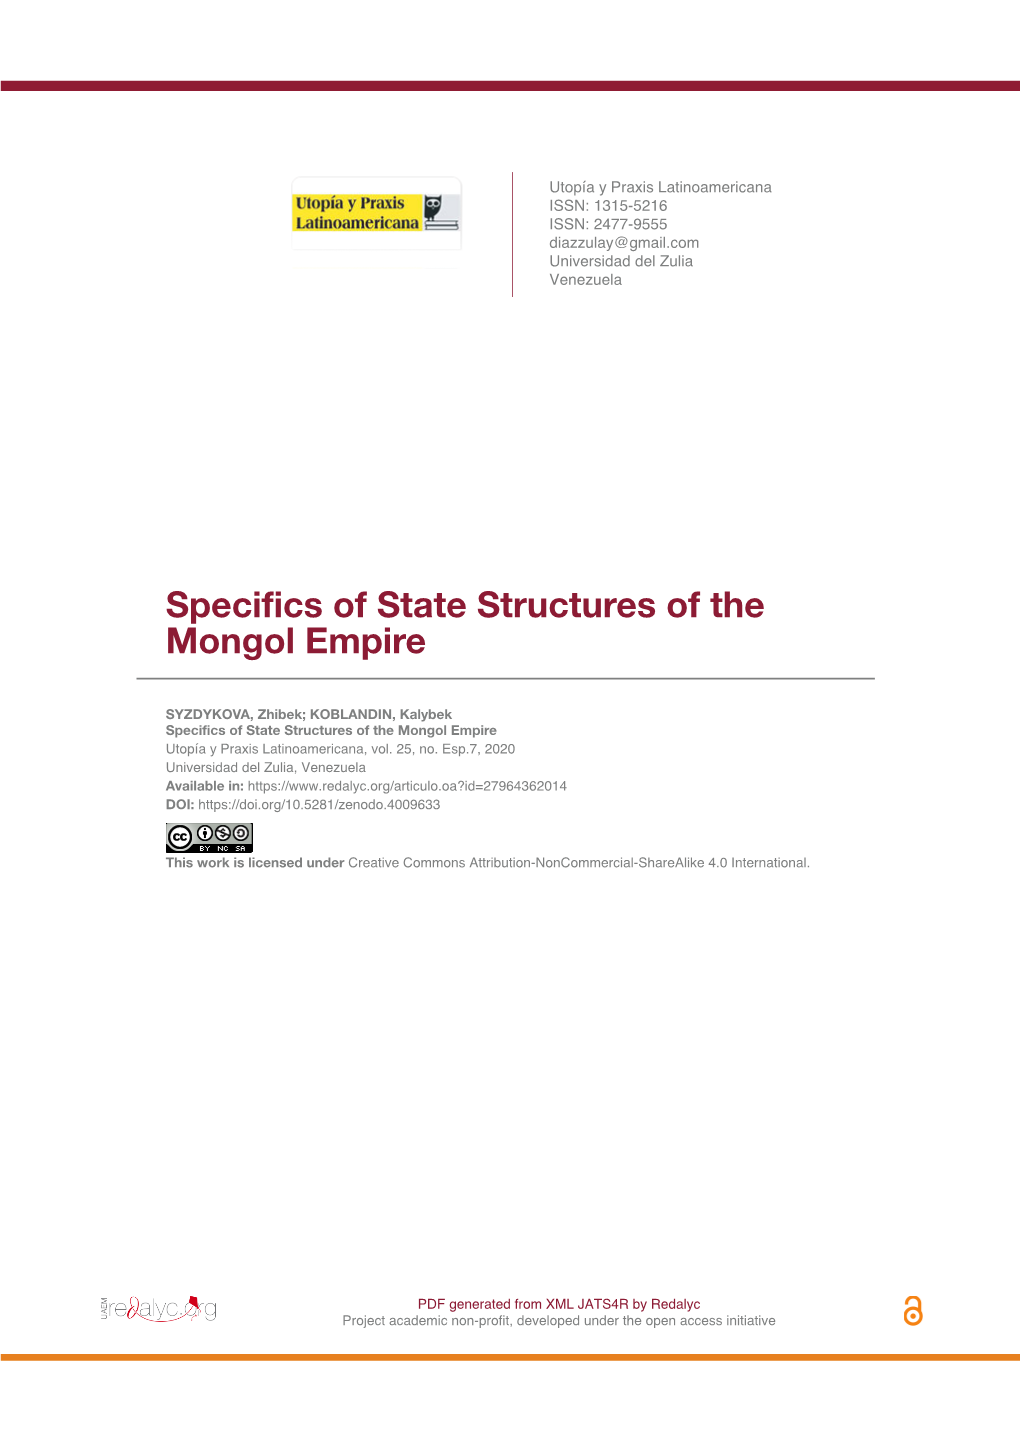 Specifics of State Structures of the Mongol Empire